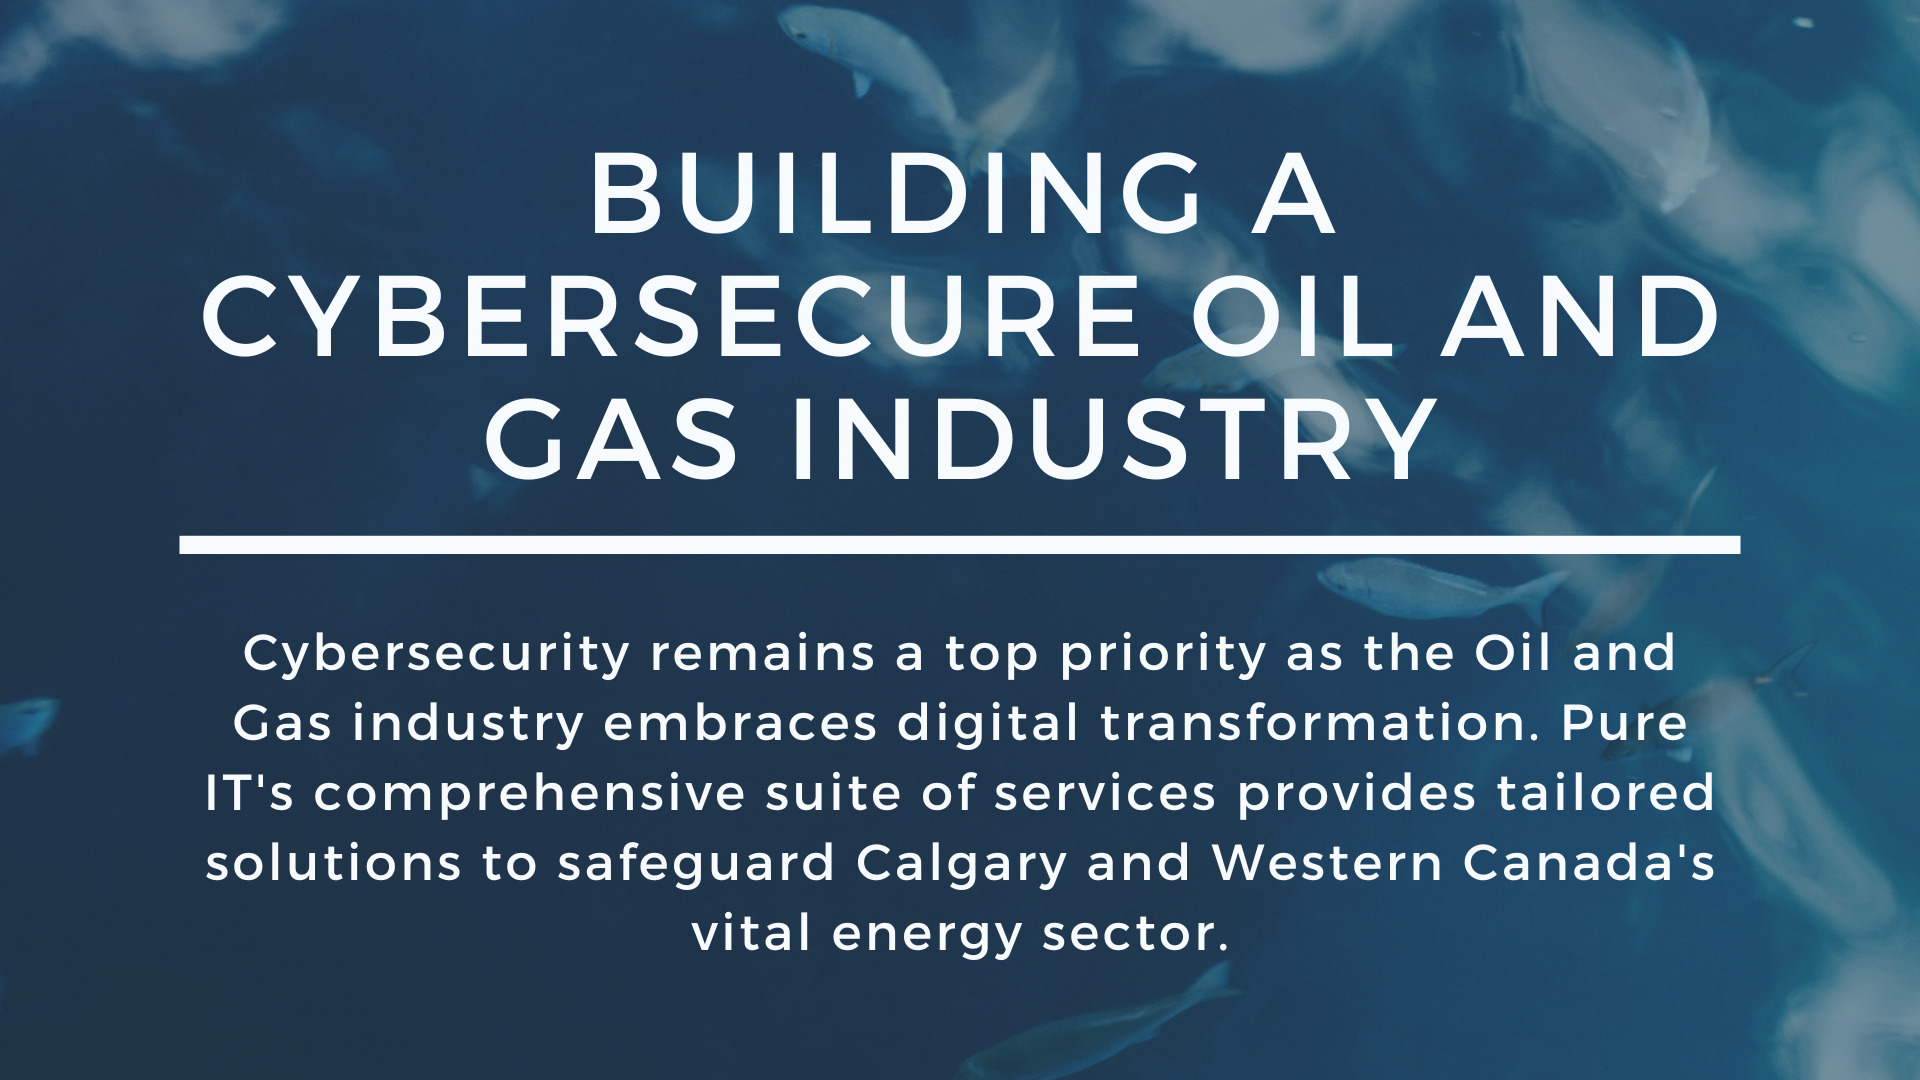 Building a Cybersecure Oil and Gas Industry